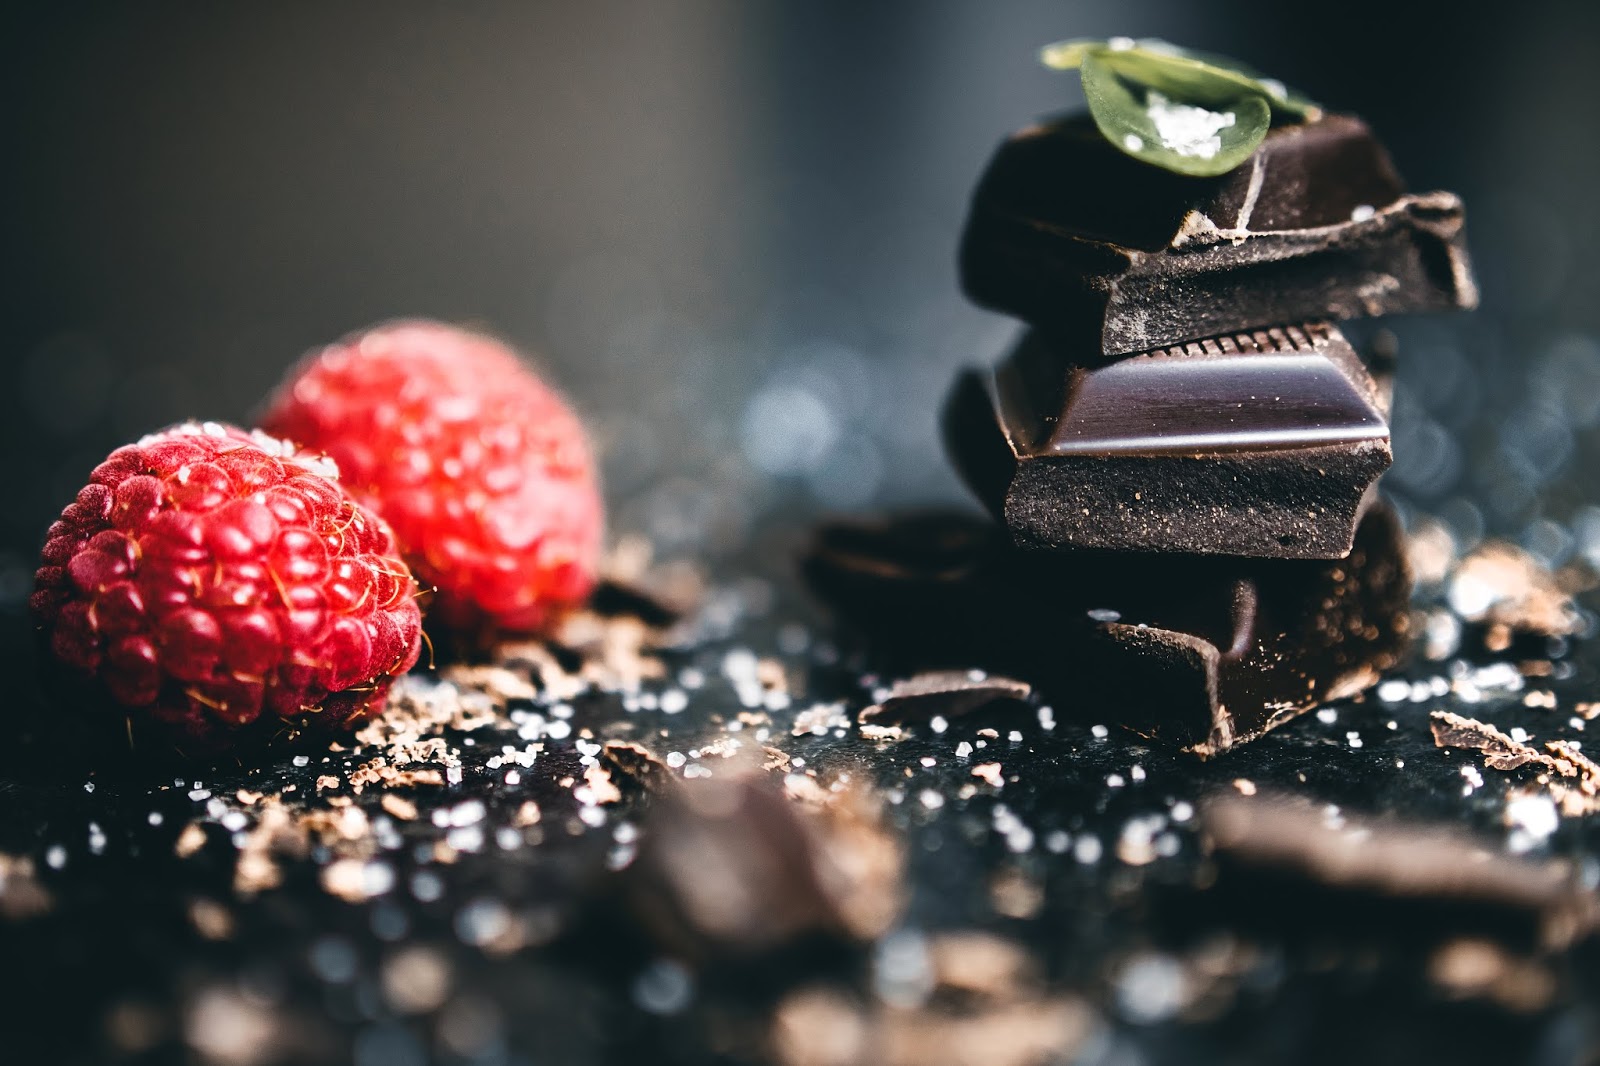 Love for Chocolate, Several Advantages and Disadvantages